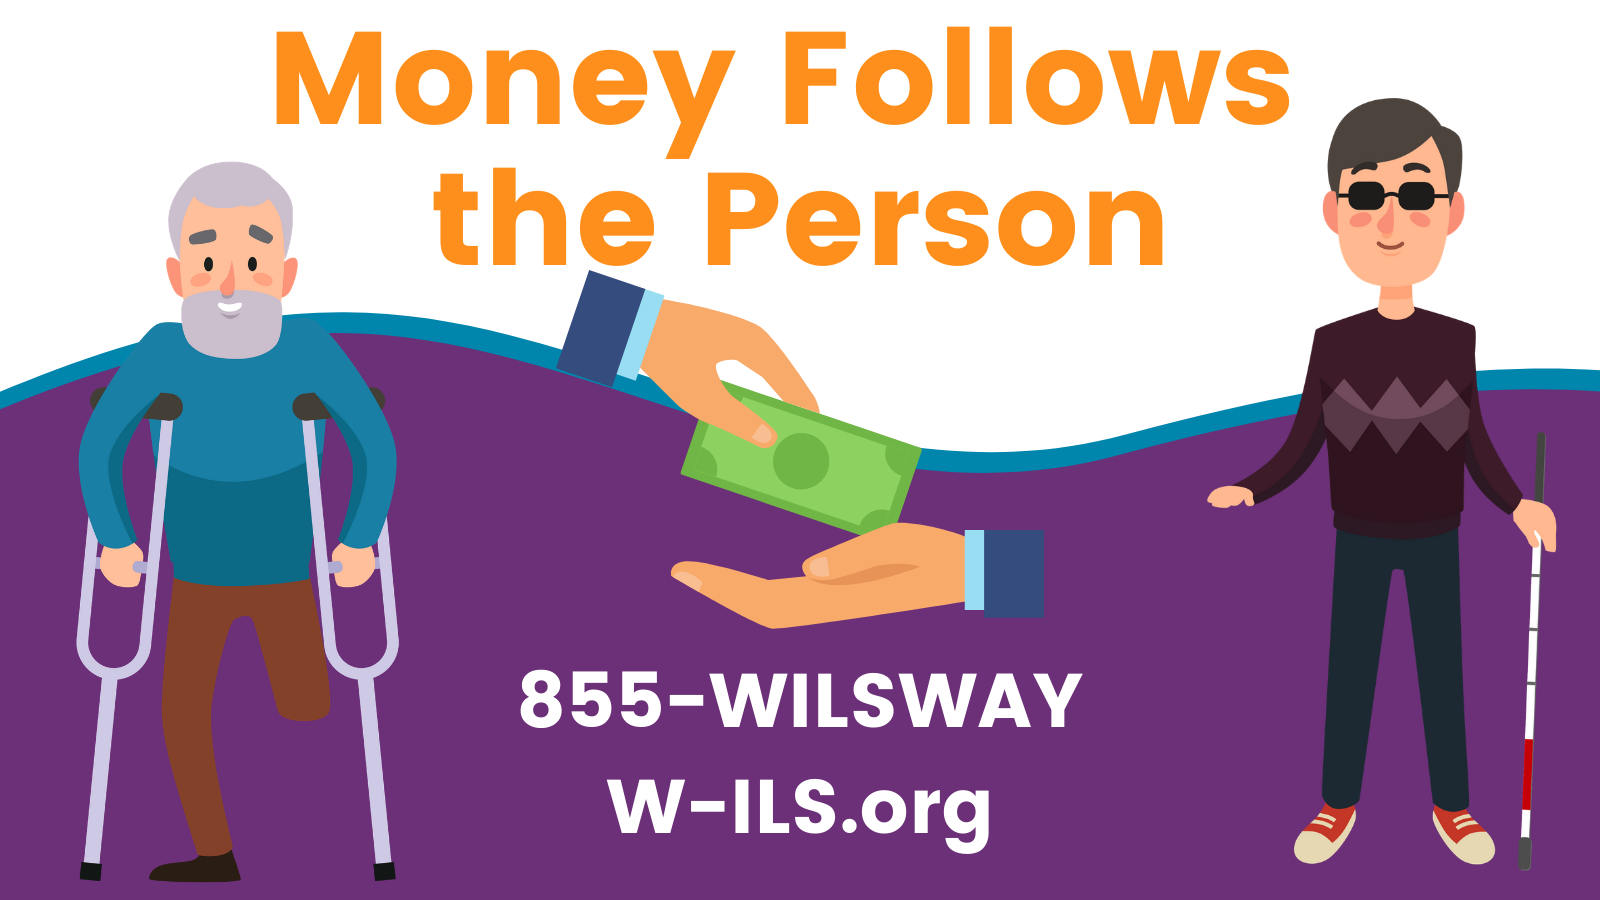 Money Follows the Person. Contact 855-WILSWAY or W-ILS.org